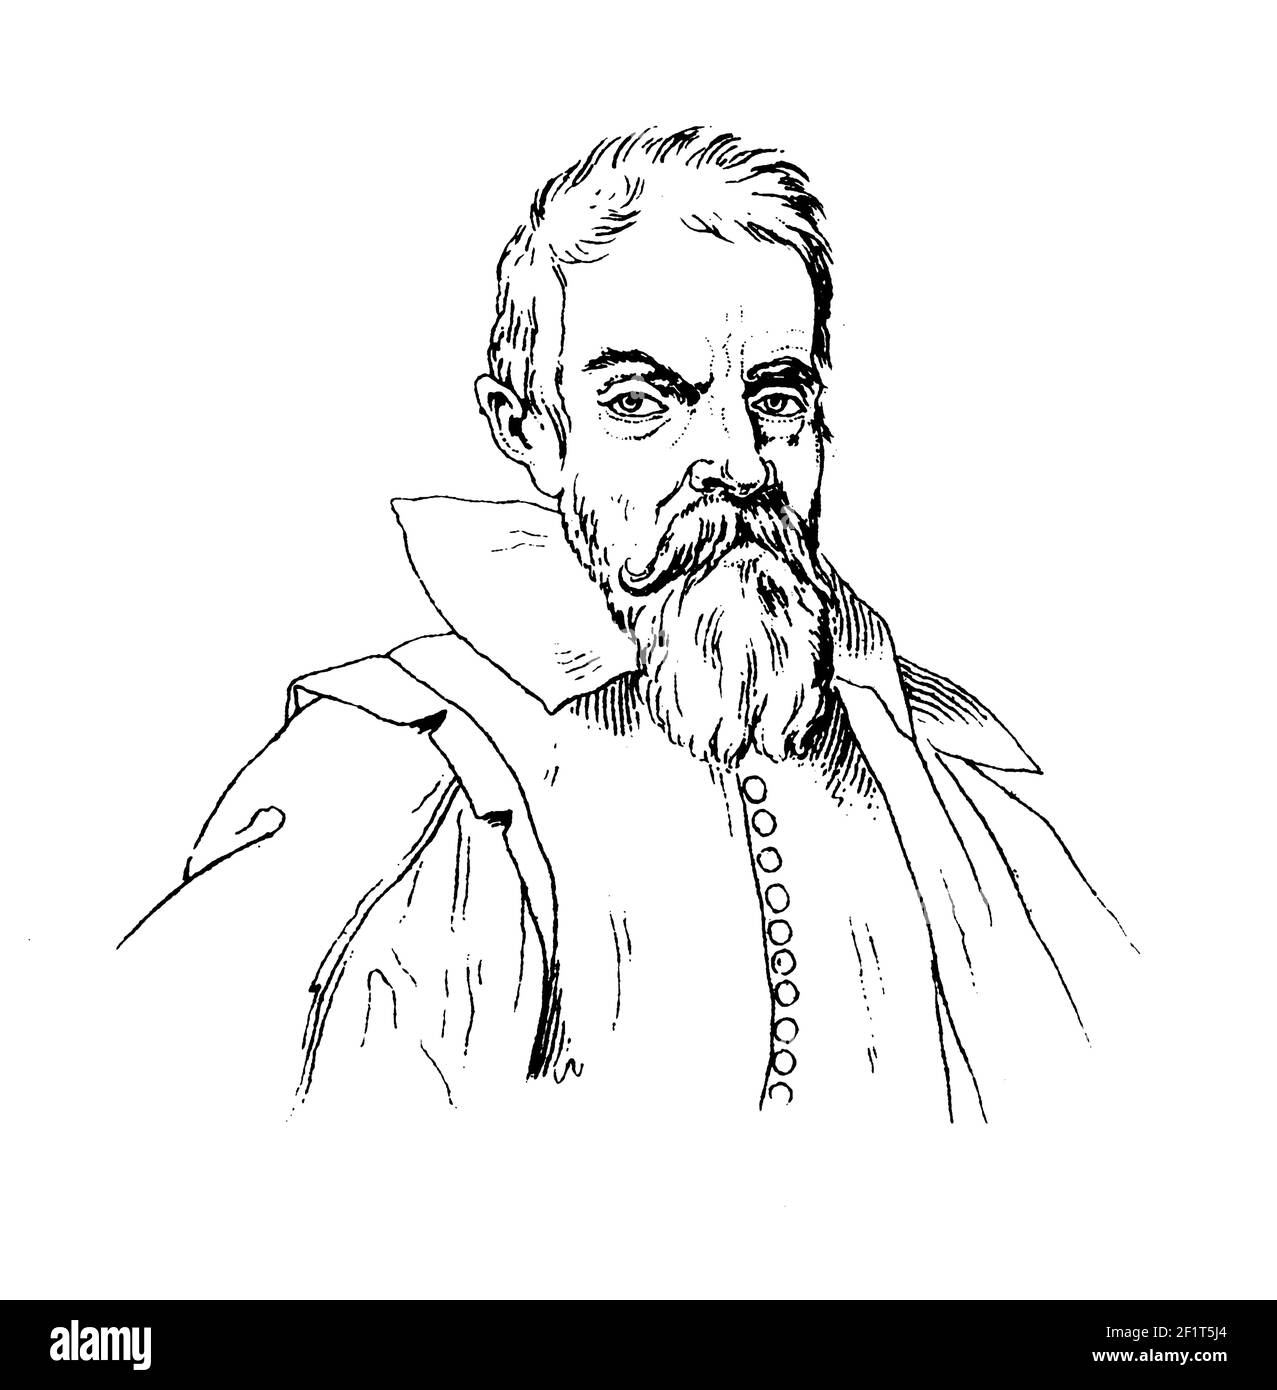 Antique 19th-century illustration of a portrait of Galileo Galilei, Italian physicist, mathematician, astronomer, and philosopher who played a major r Stock Photo